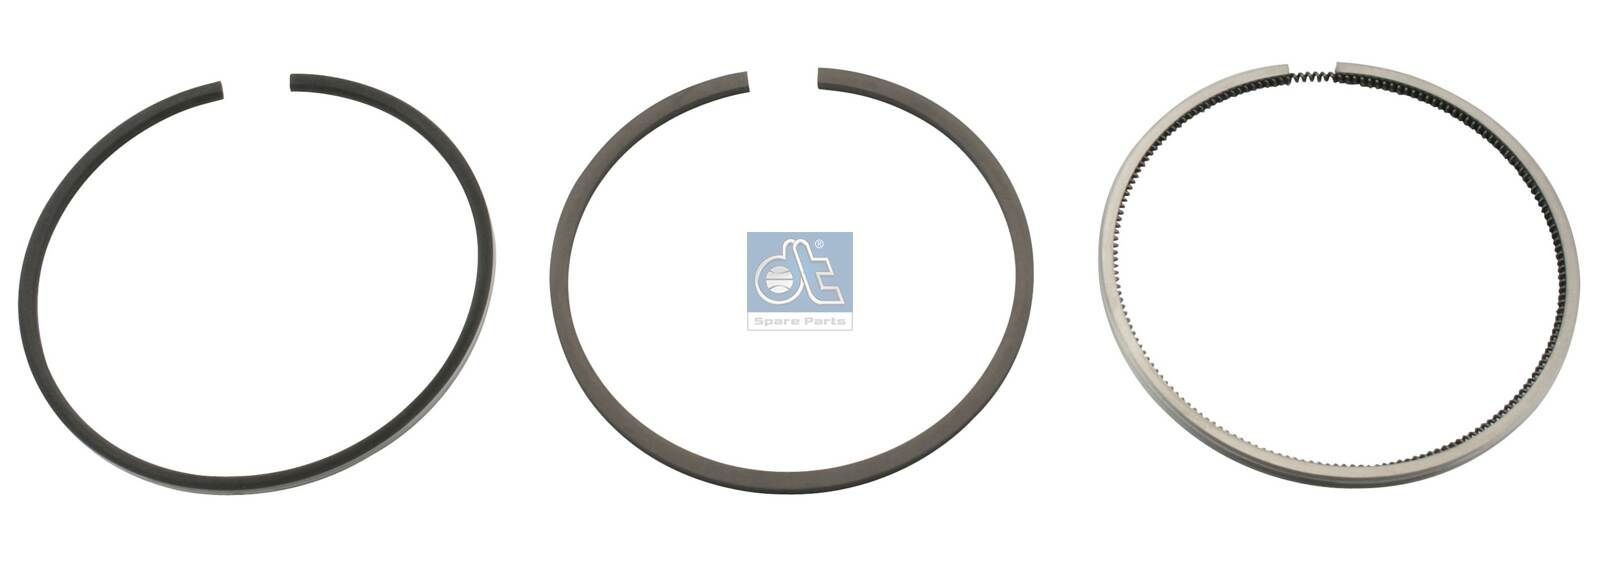 037 44 N0 DT Spare Parts Piston Ring Set 2.90082 buy